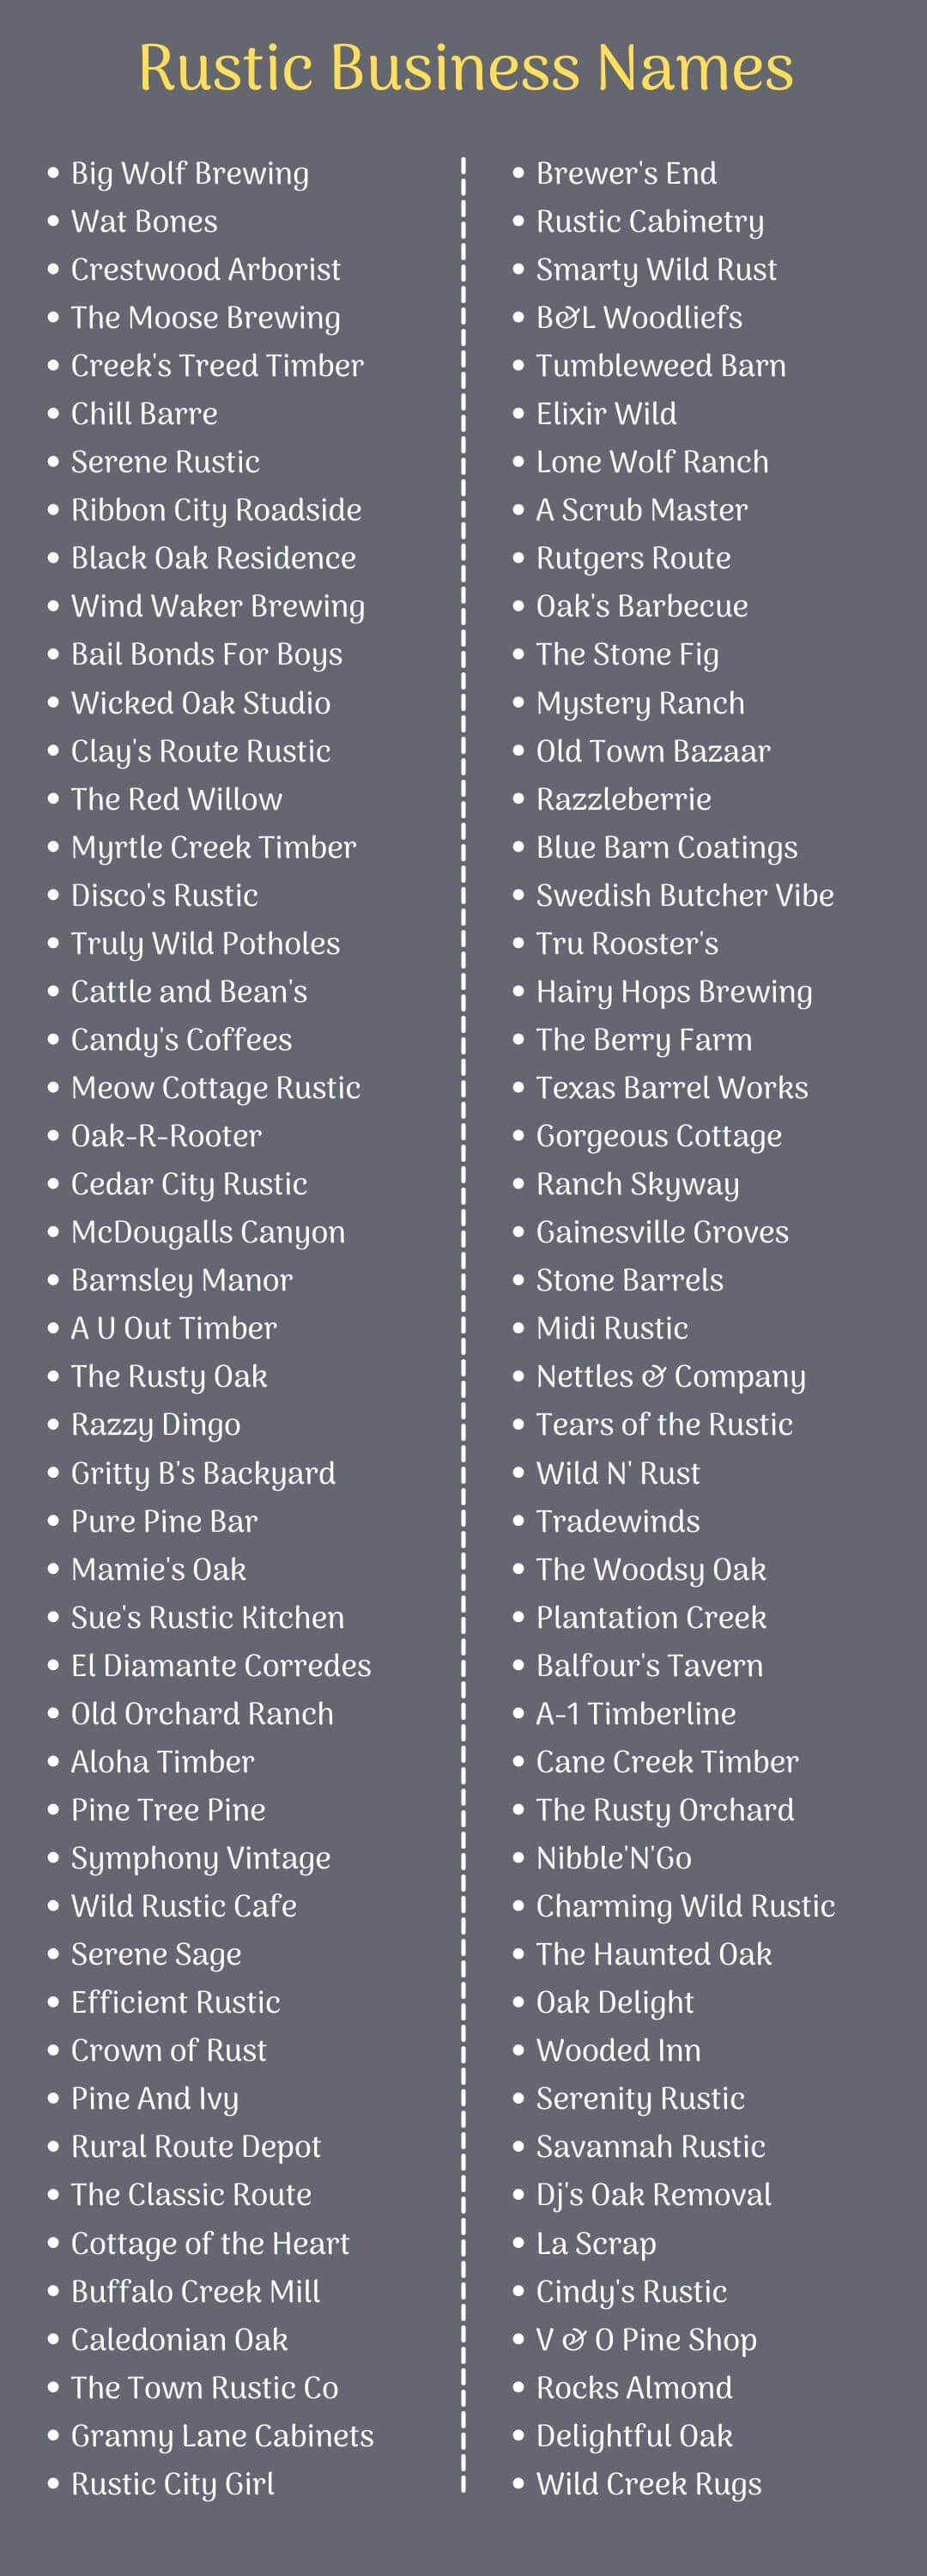 Rustic Business Names infographic